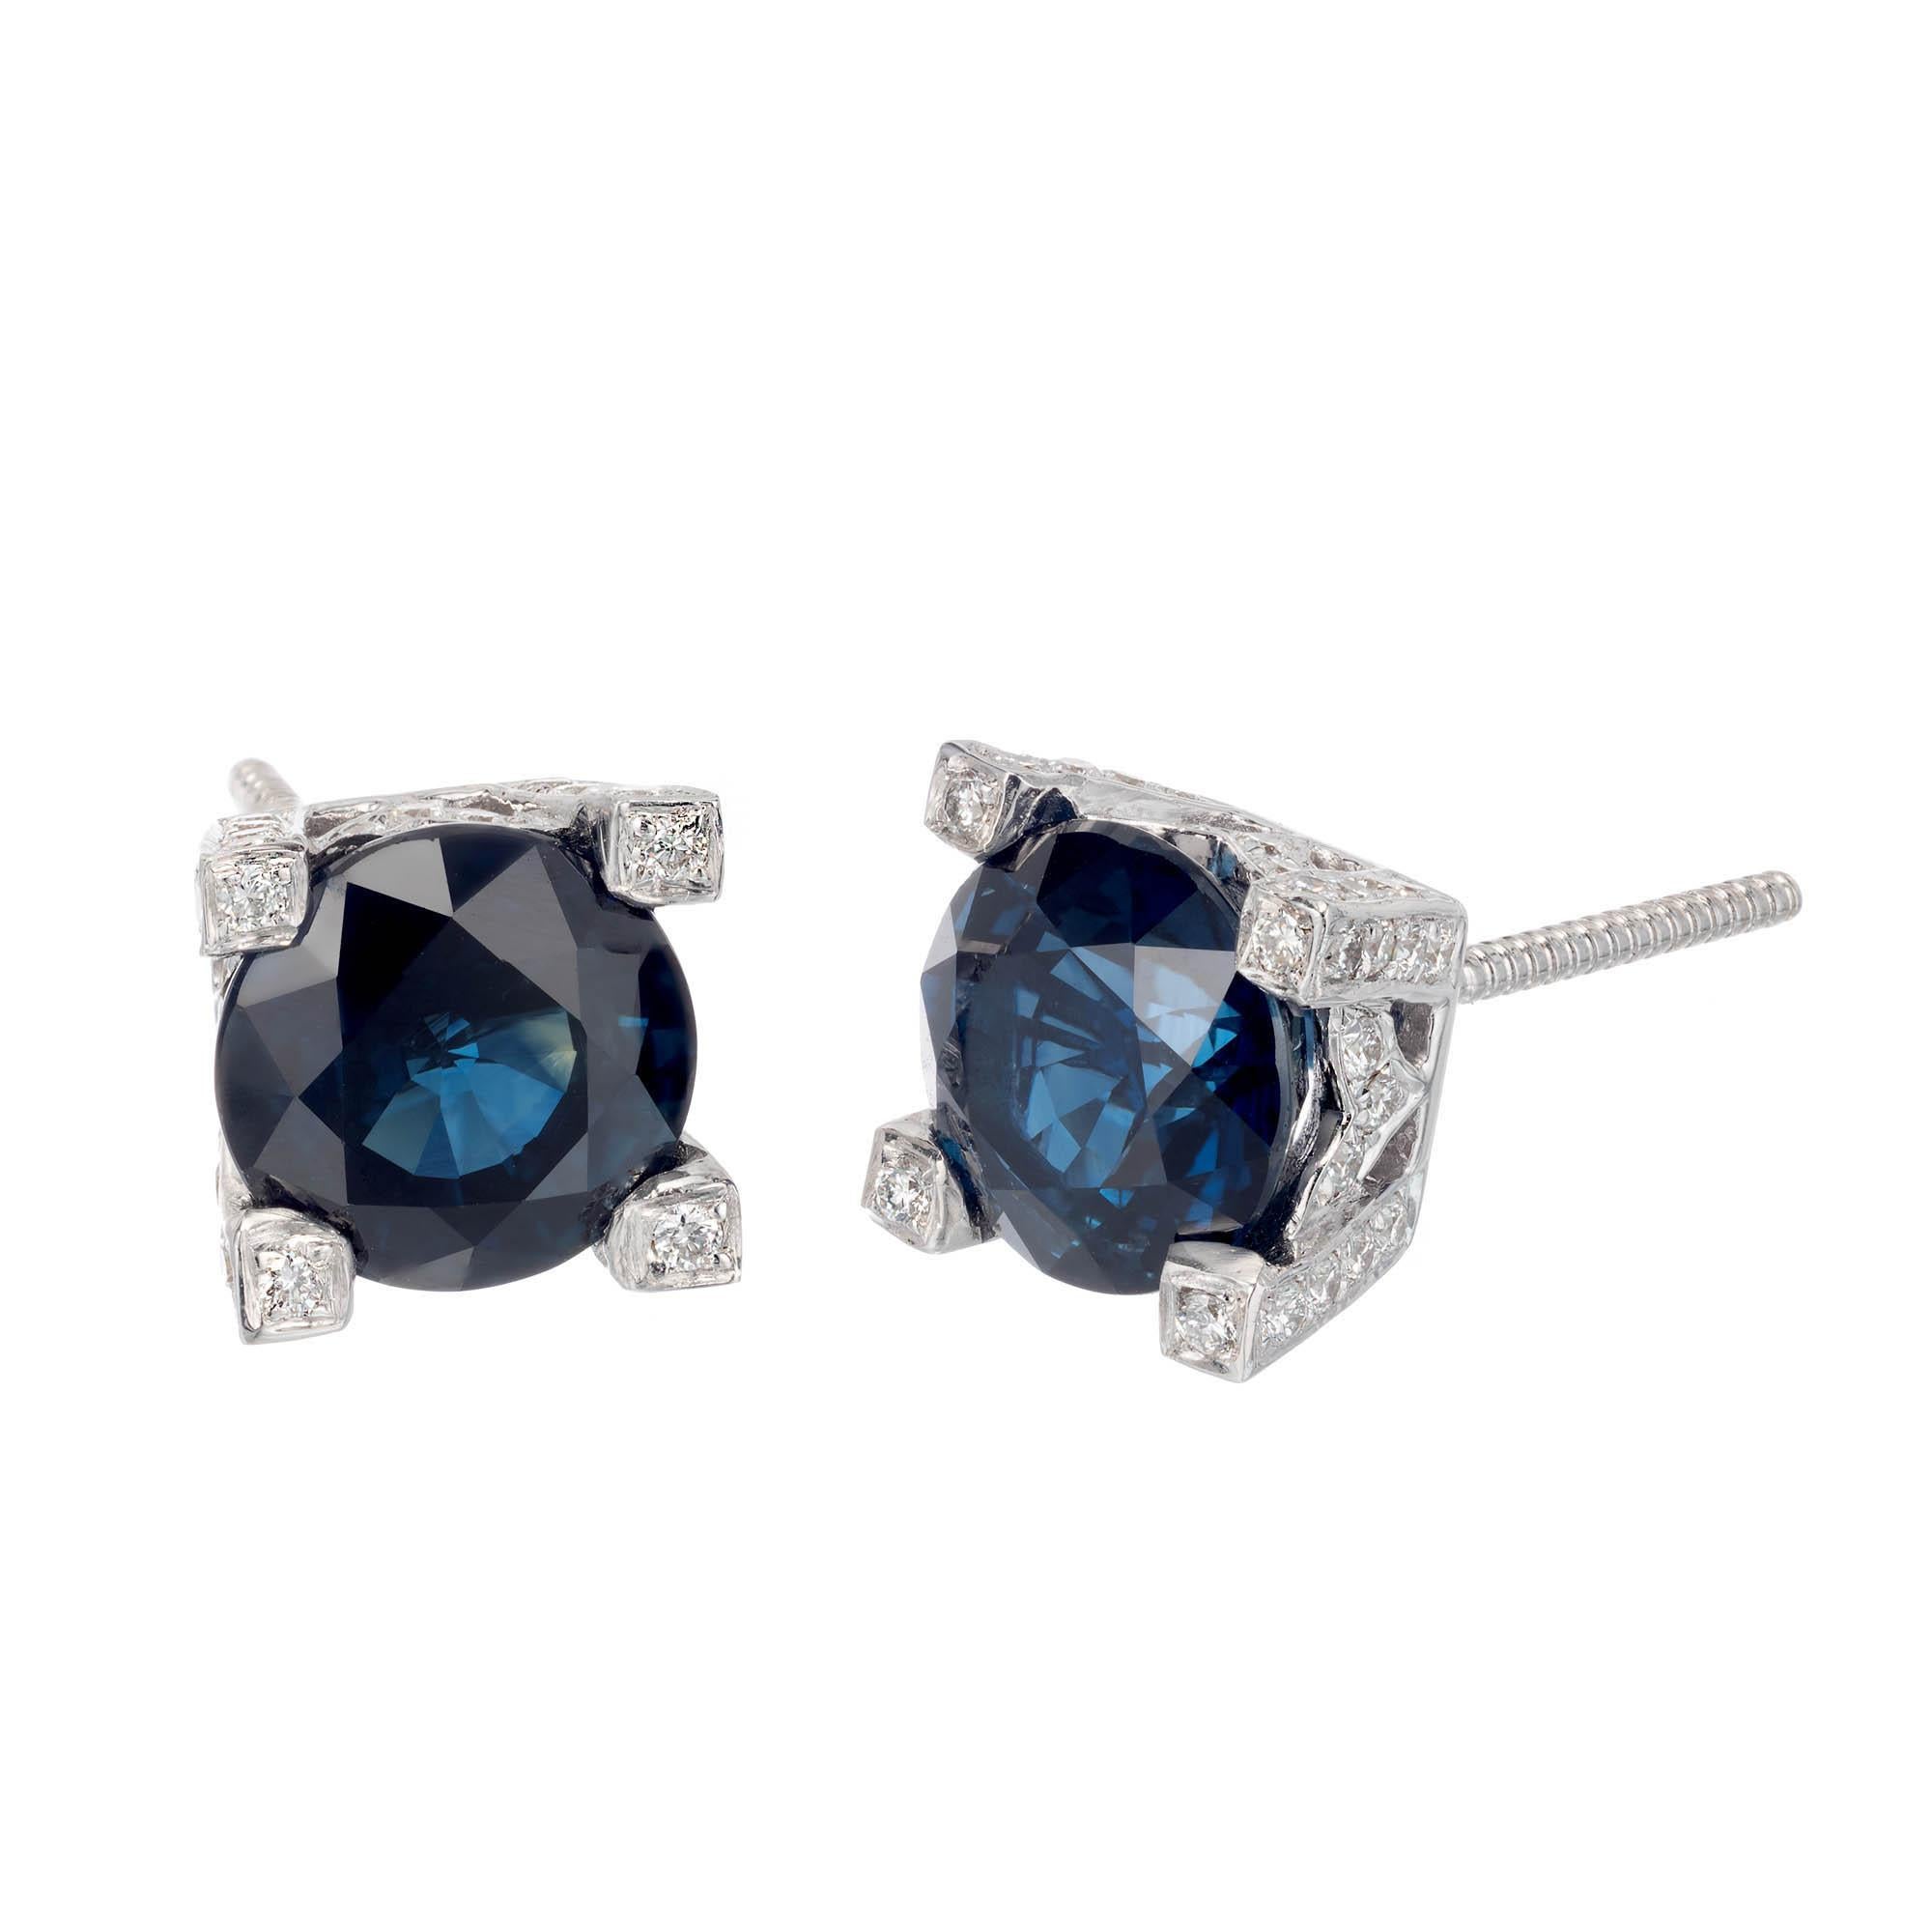 5.02 Carat royal blue natural no heat sapphire stud earrings. Gia certified 2.47 and 2.55 carat random tested. Sapphires are set in micro pave 18k white gold screw back baskets earrings, crafted in the Peter Suchy Workshop. 

2 round brilliant cut